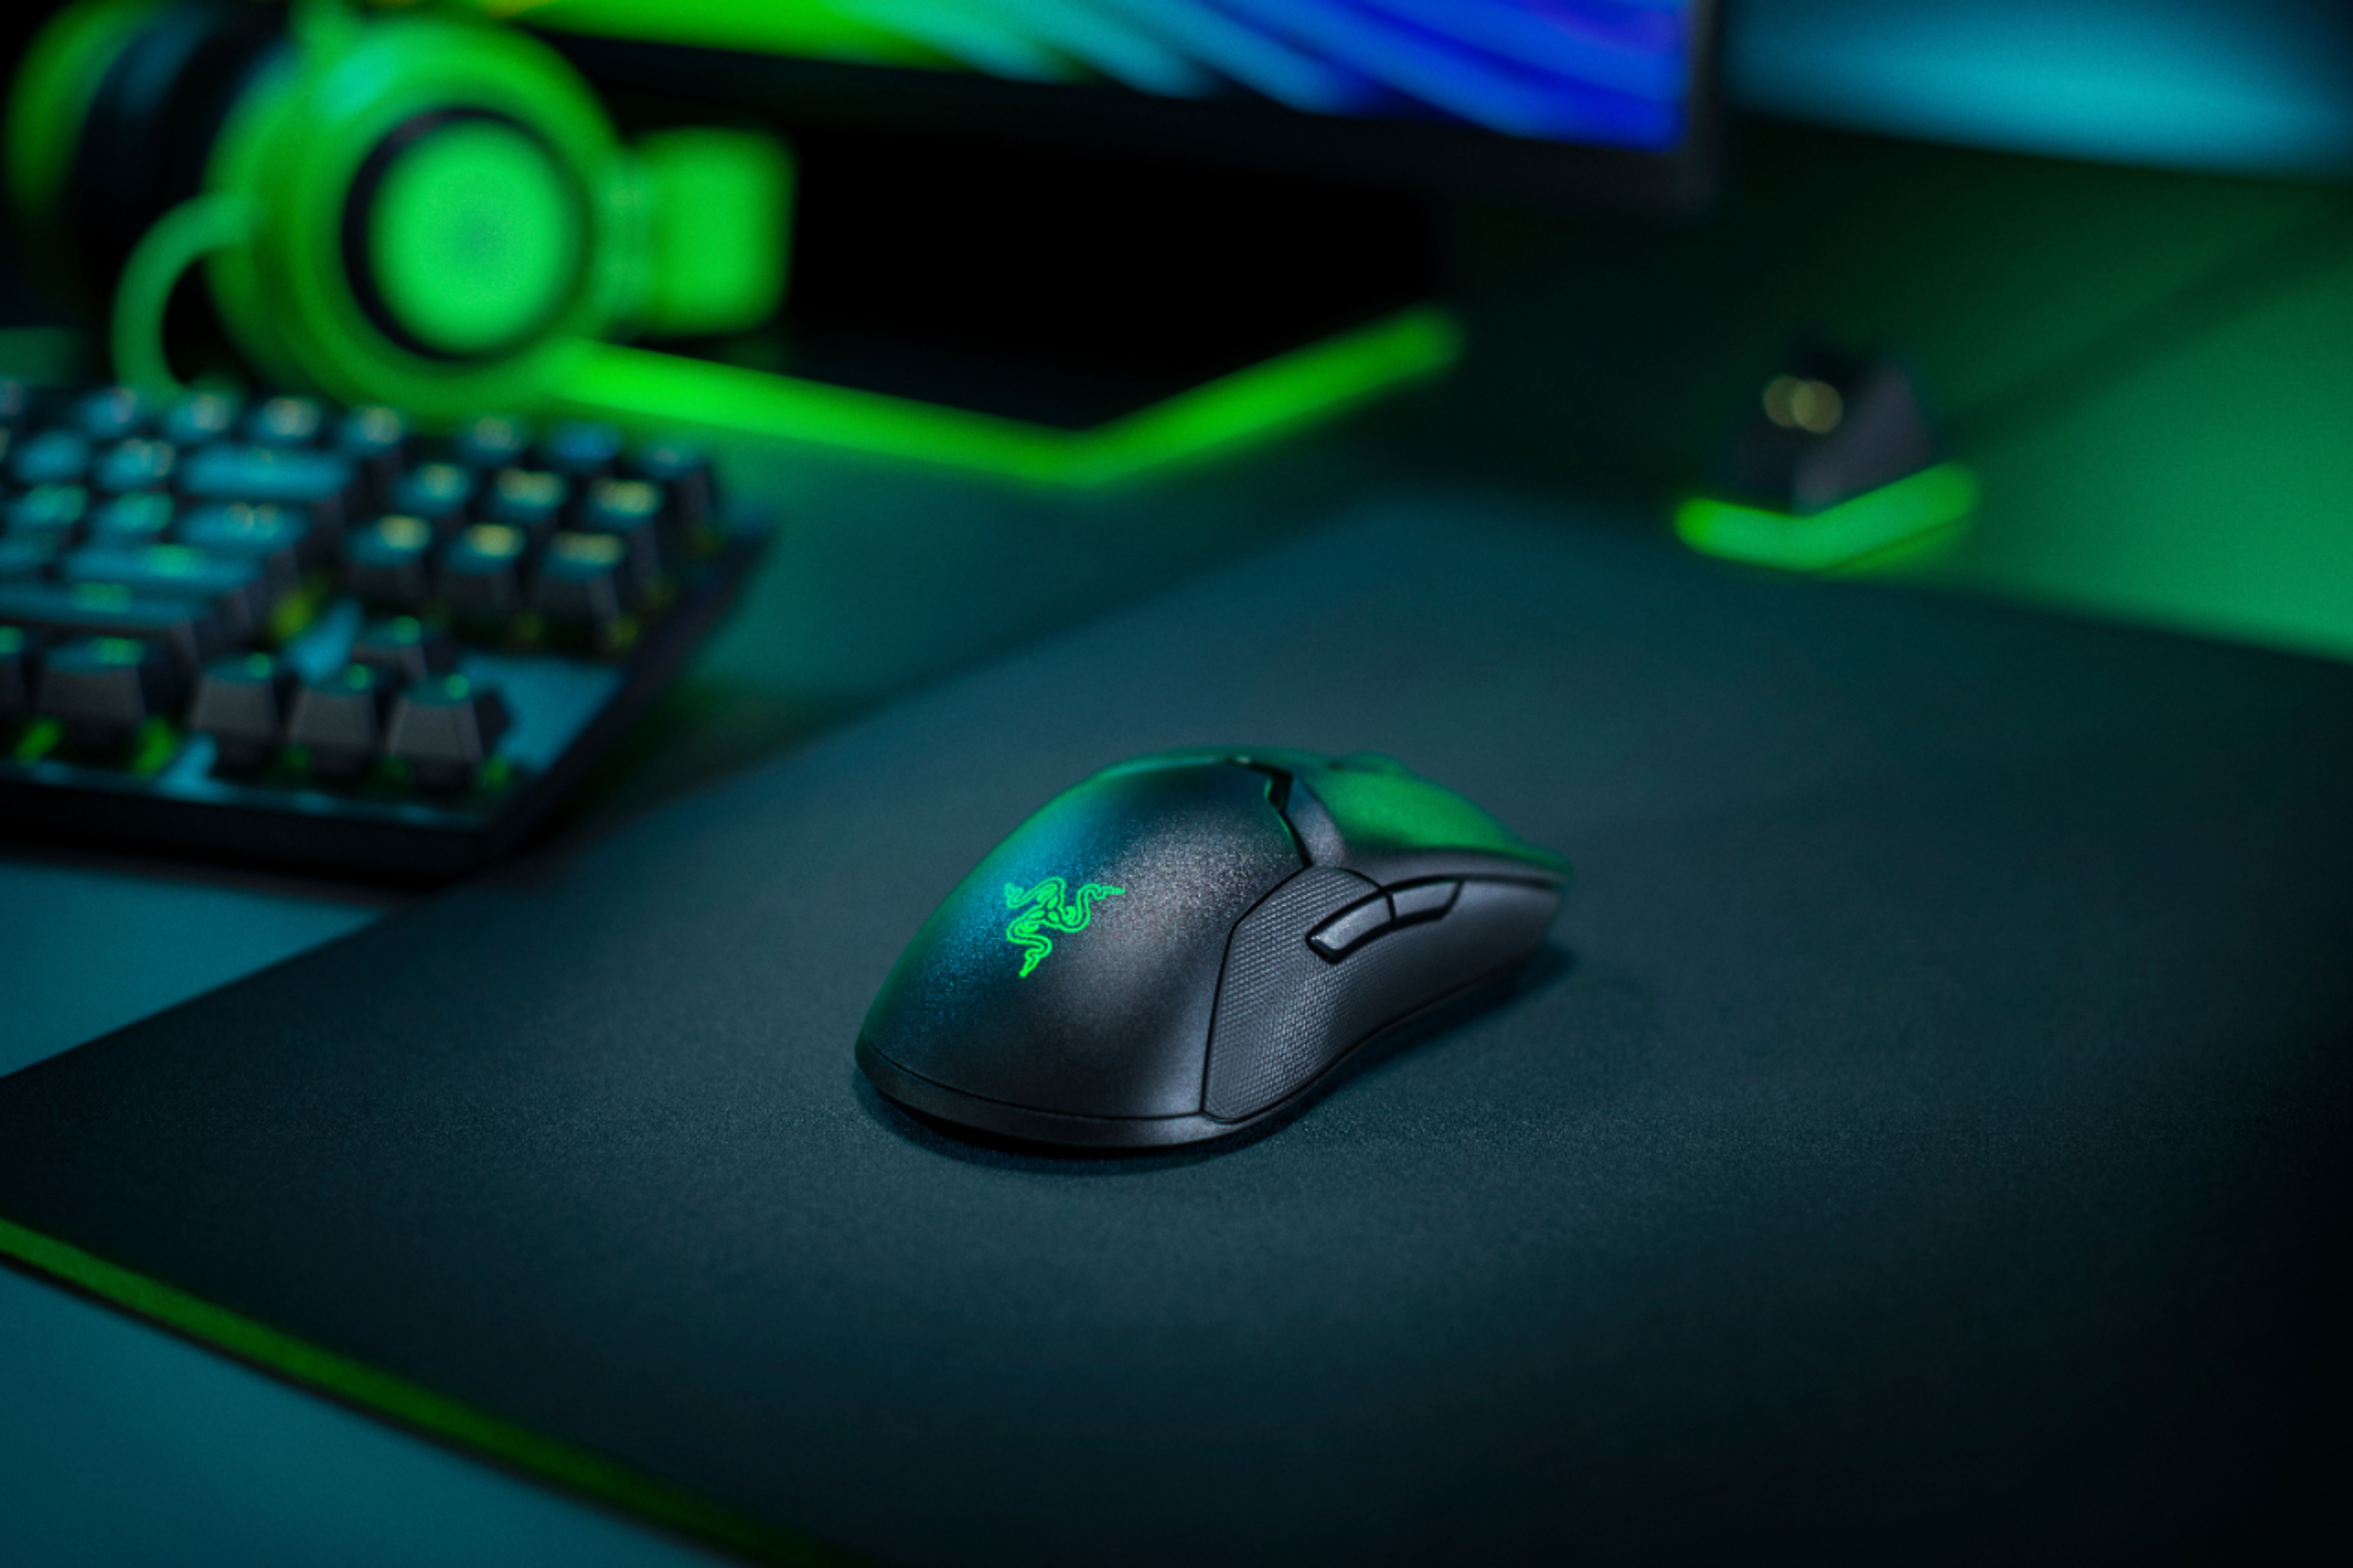 Razer Viper Ultimate Ultralight Wireless Optical Gaming Mouse with 